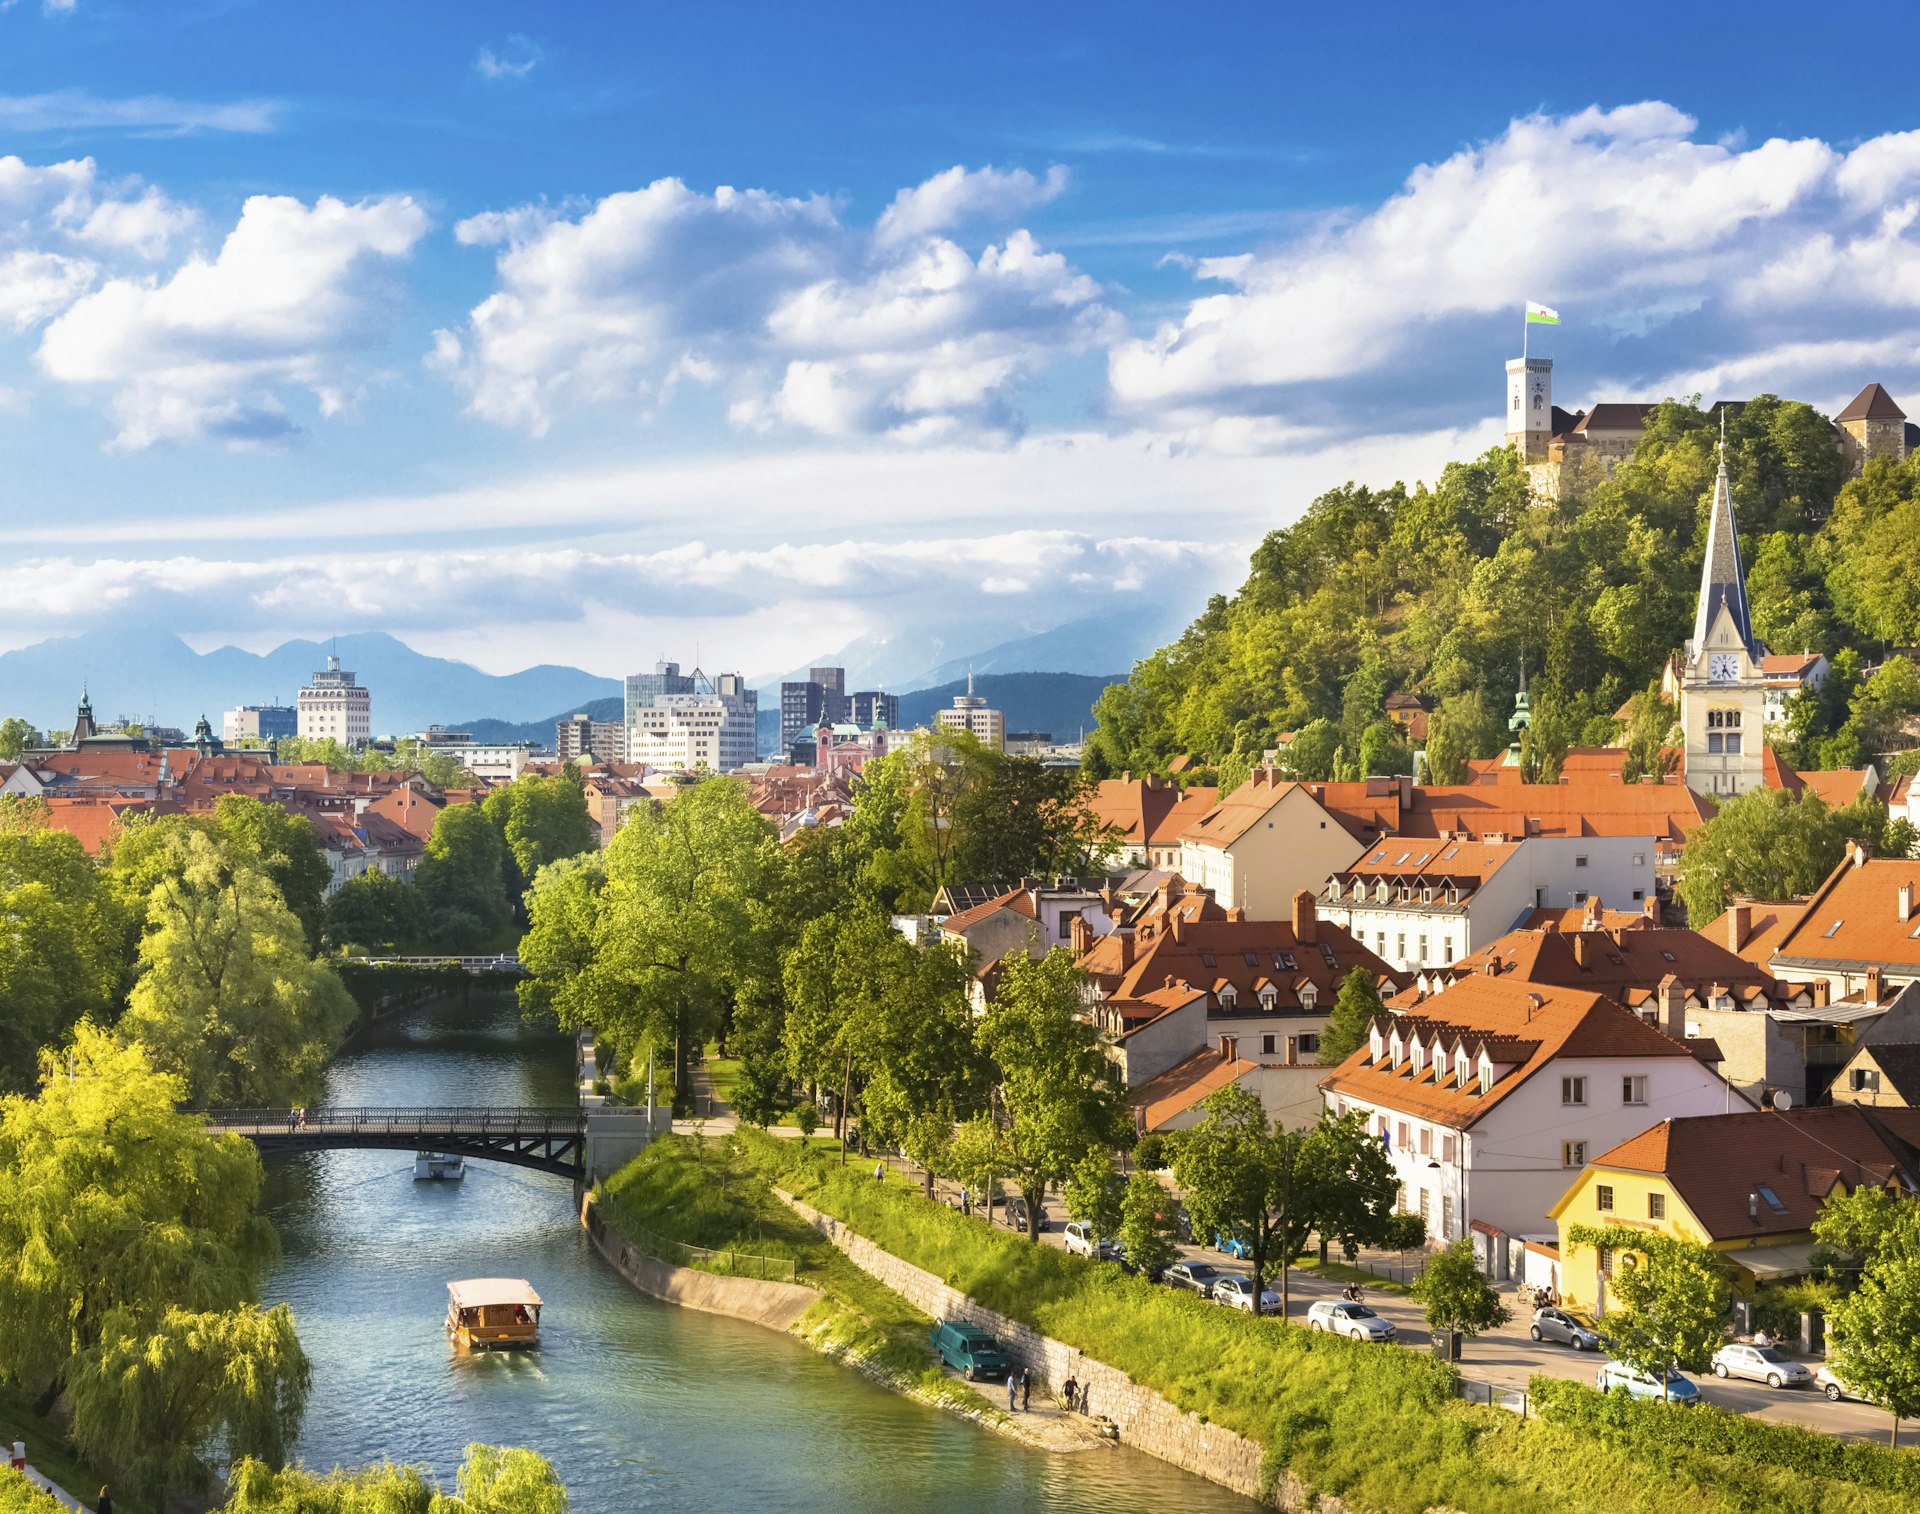 A panorama of Ljubljana, with a river, lush hills, and buildings with terracotta-colored roofs